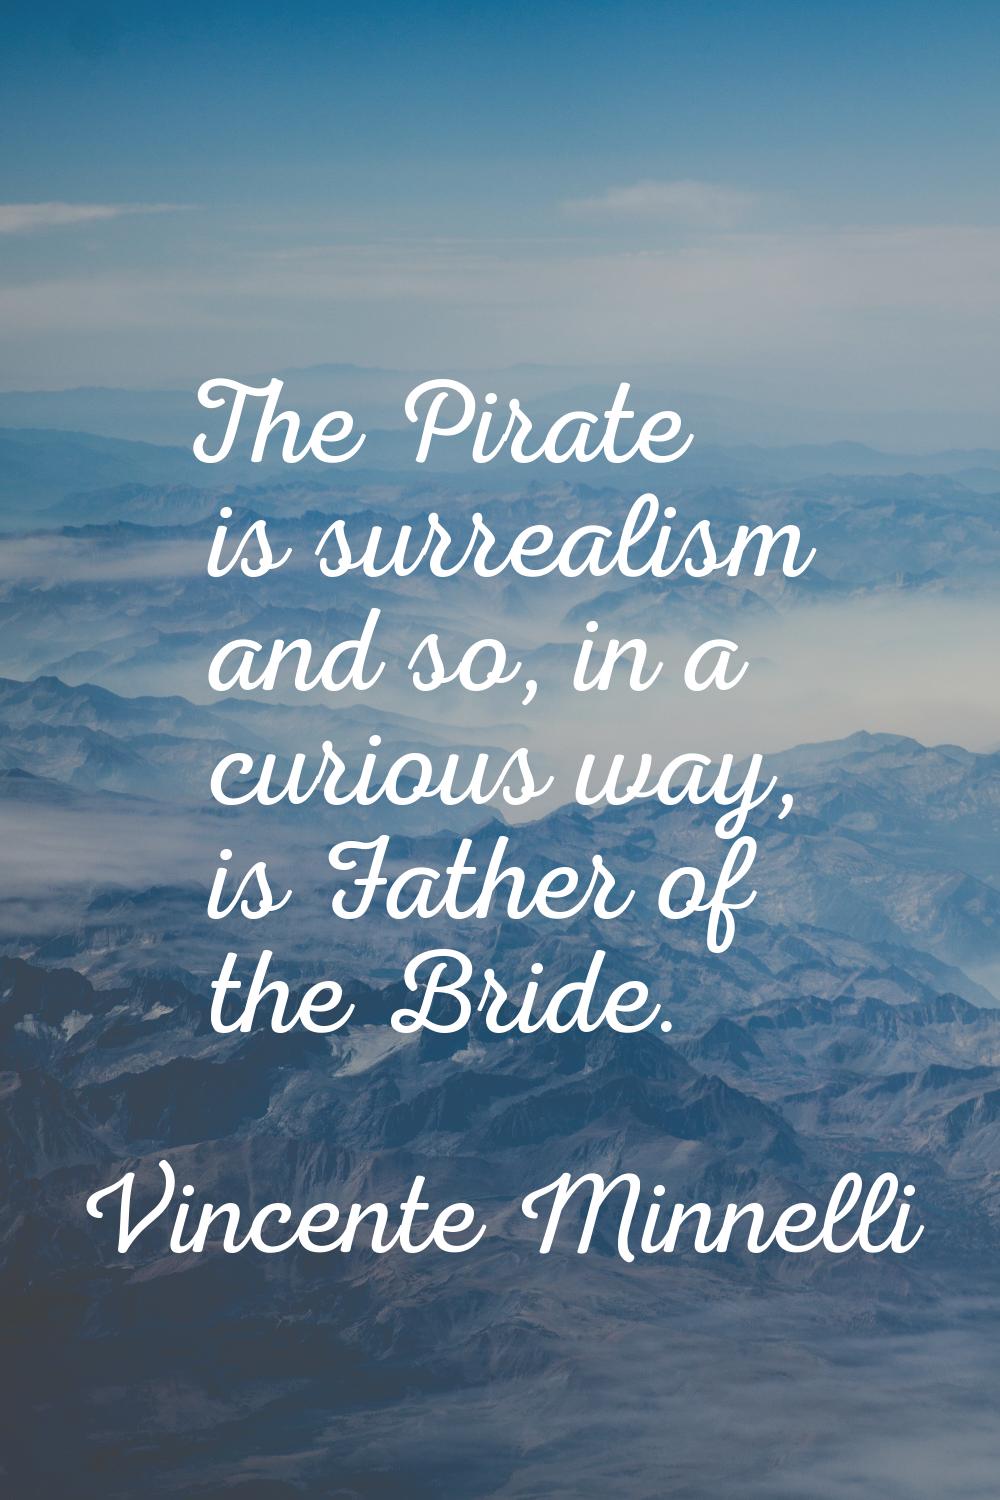 The Pirate is surrealism and so, in a curious way, is Father of the Bride.